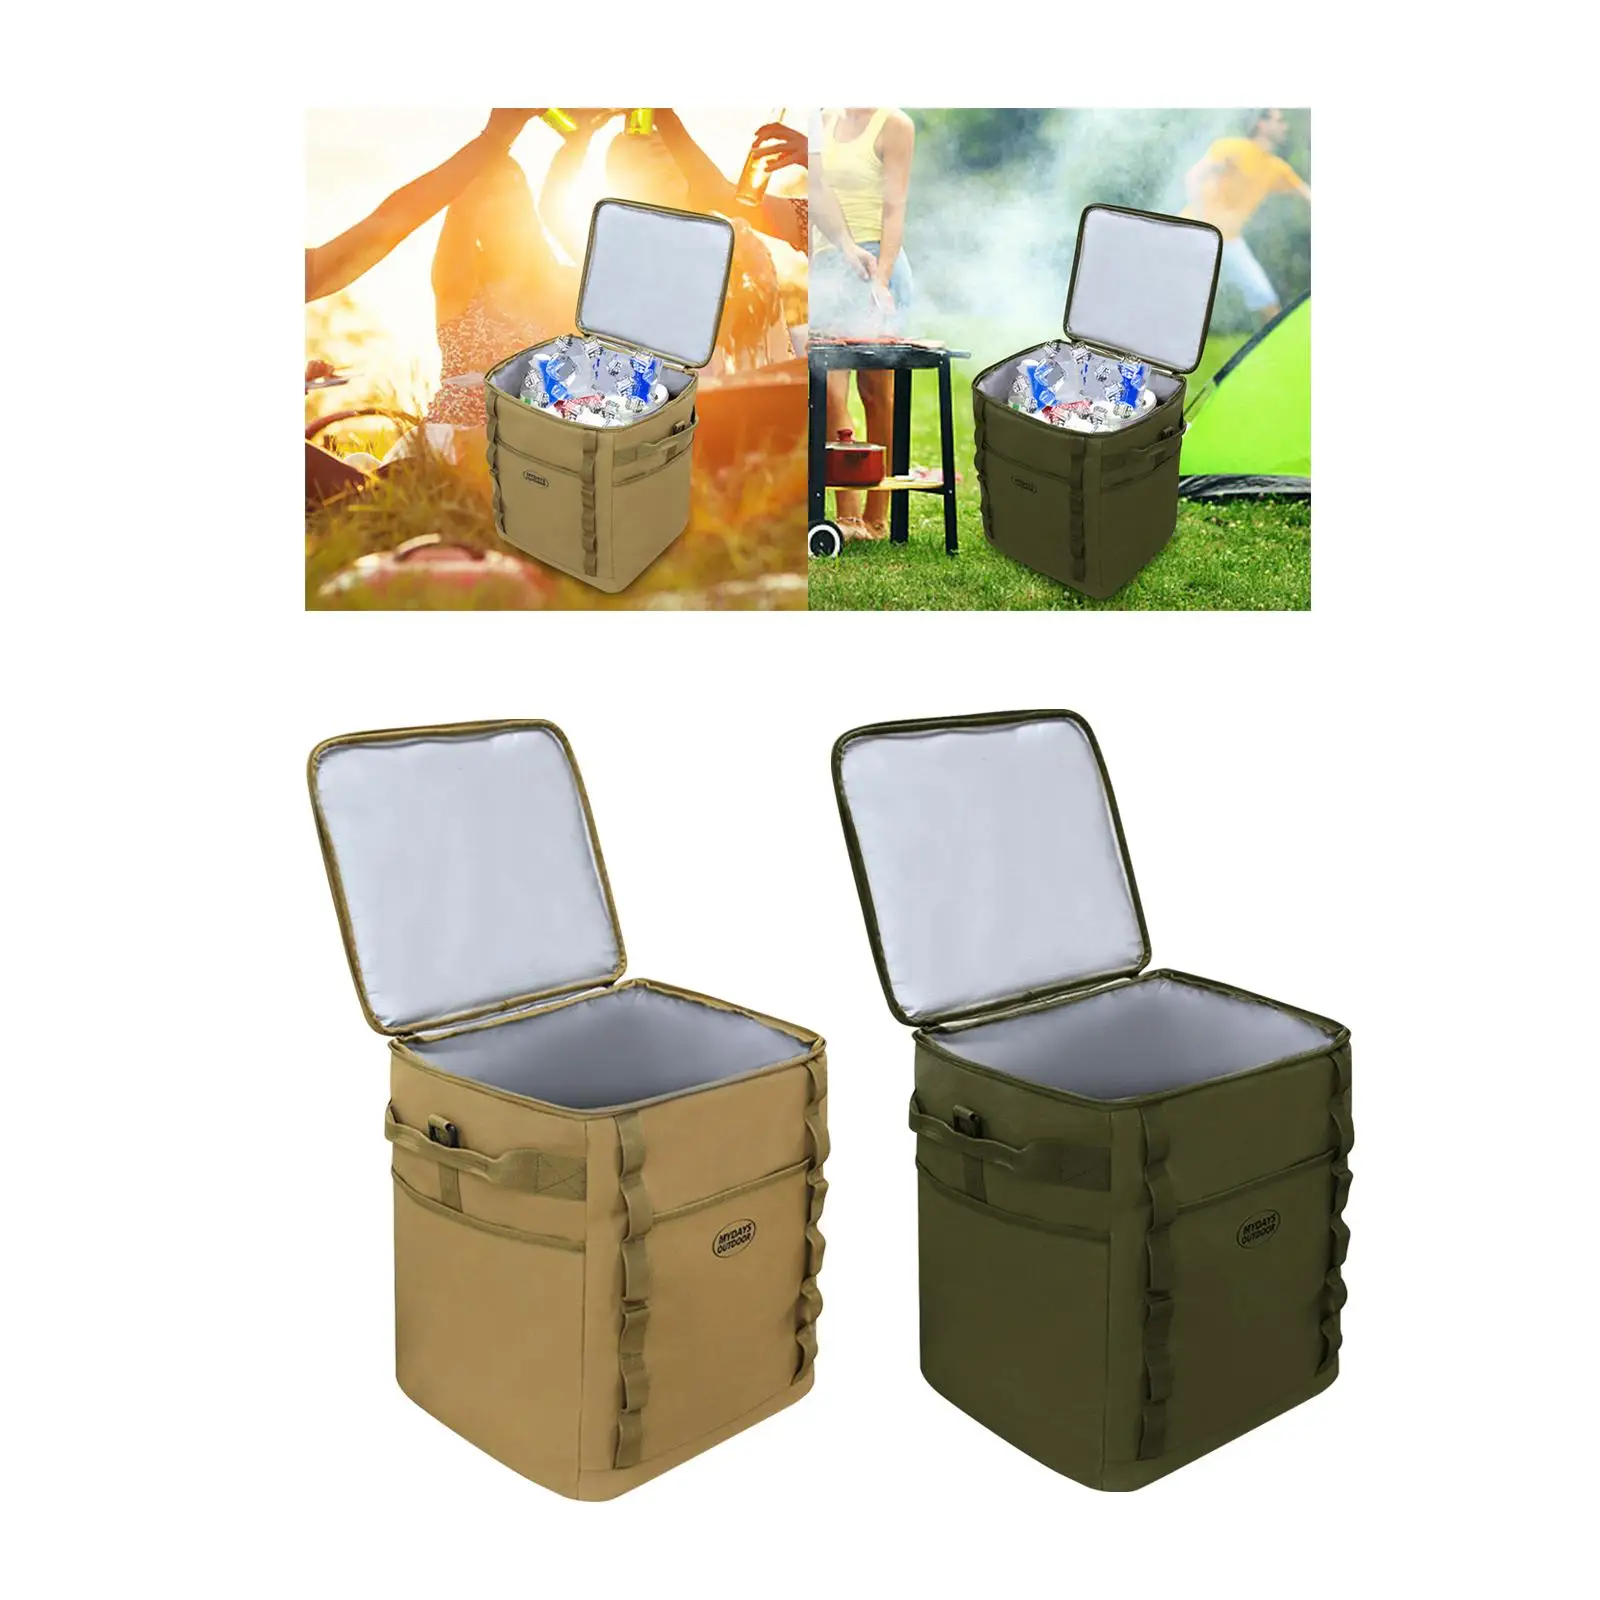 Camping Storage Bag Accessories Studry Zipper Compact Waterproof Basket Ice Bag for Outdoor Activities Hiking Camping Travel BBQ